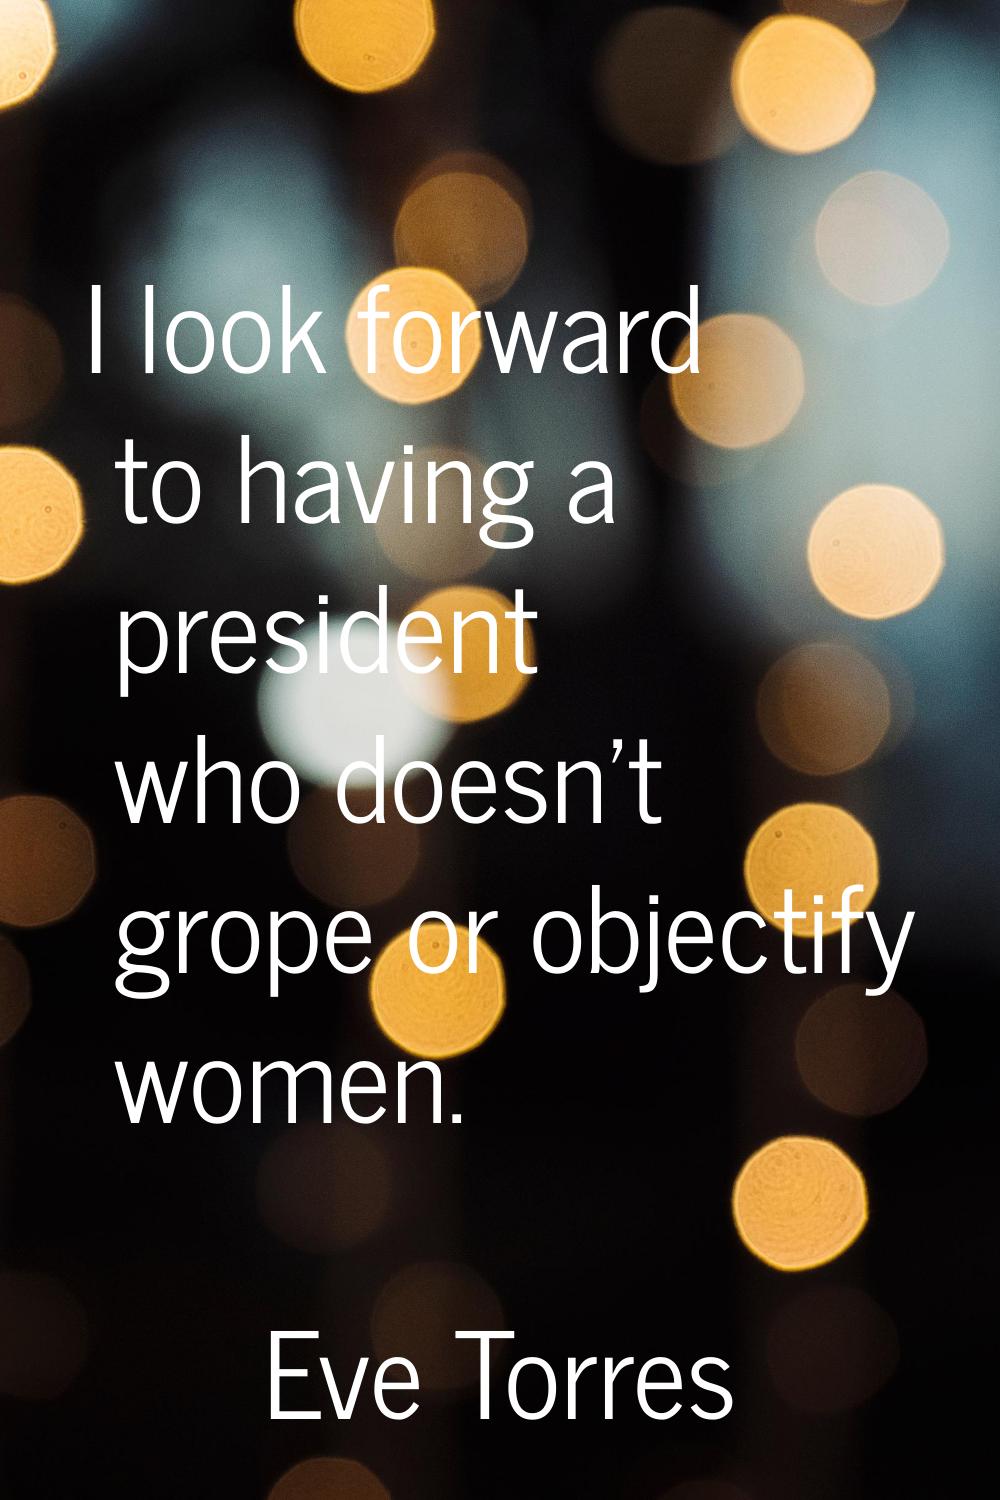 I look forward to having a president who doesn't grope or objectify women.